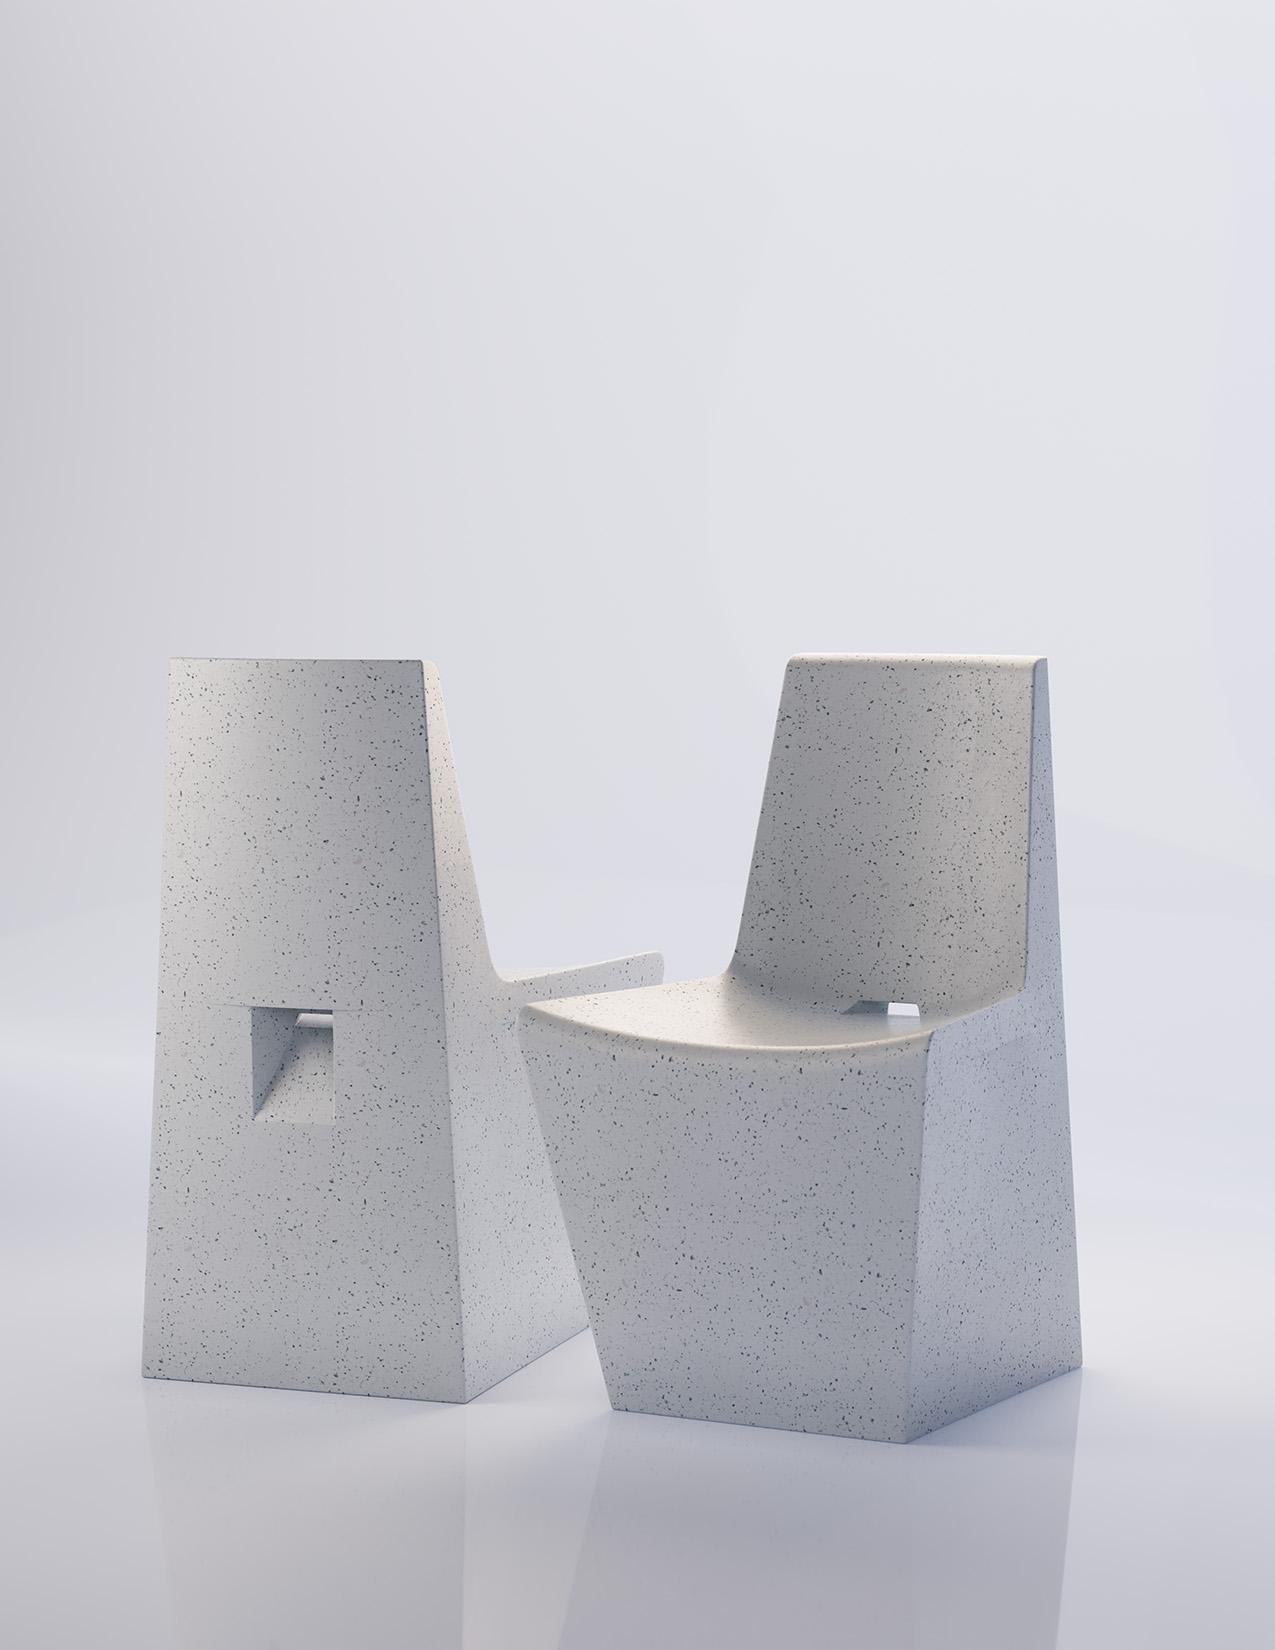 Cast Resin 'Dewey' Dining Chair, White Stone Finish by Zachary A. Design For Sale 1